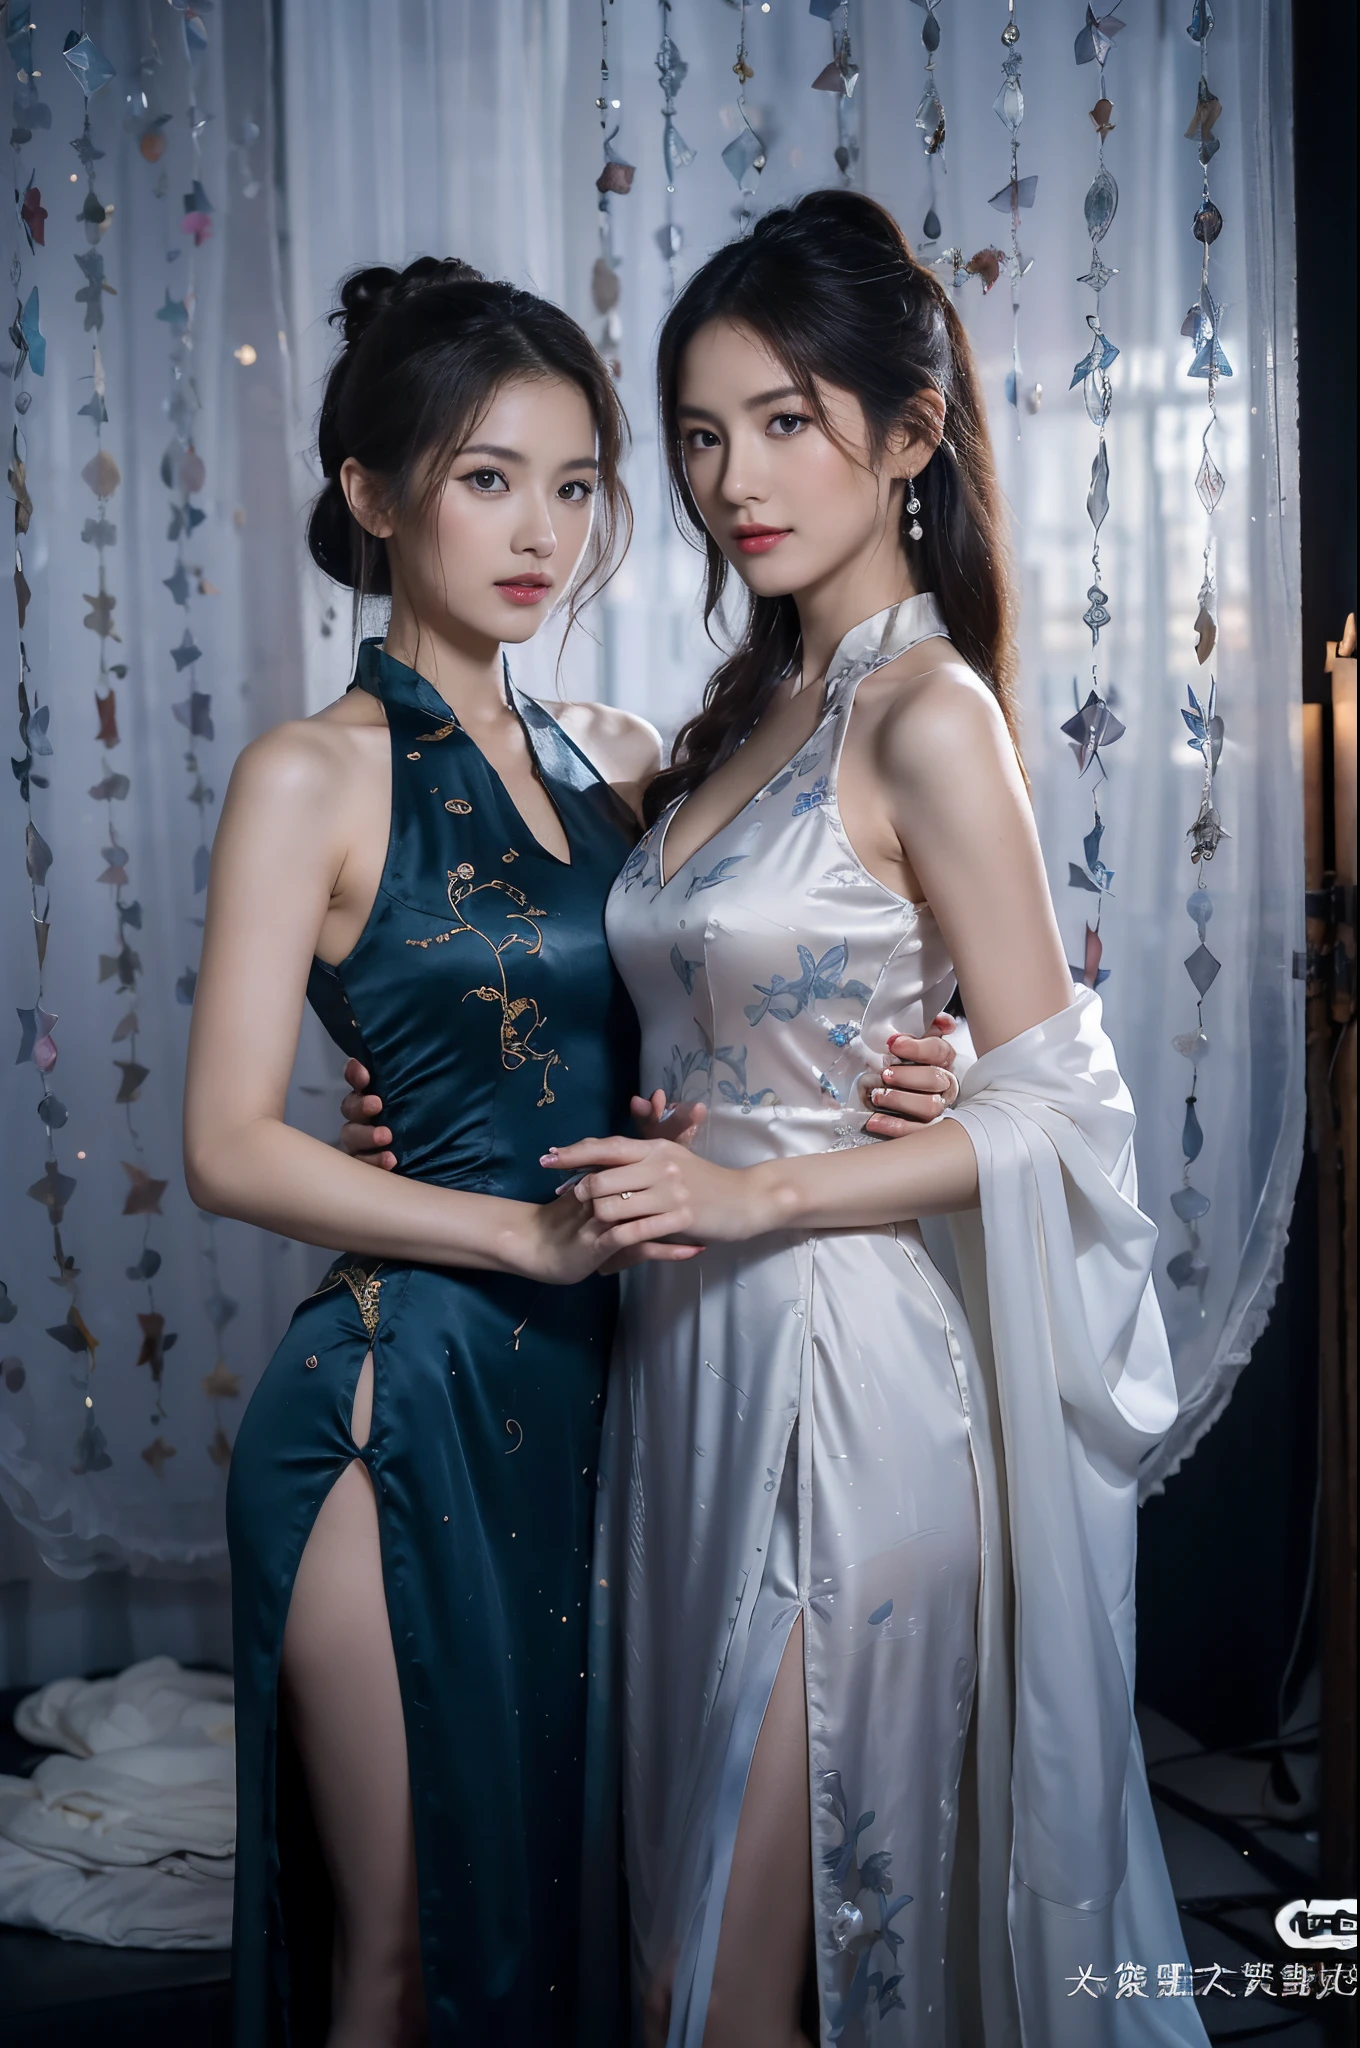 The proportions are the same for all races, All faces and pictures must be different, High level of image quality、Like a shot with an SLR、sensual bodies,upper legs、slit、Draw a work of art，Depicts two women wearing translucent traditional cheongsam sitting together,Duo,((sisterhood)),closeup portrait:1.4,Detailed faces,Front view,Rendered by Octane, HighDynamicRange,strabismus:1.3,Chinese hair accessories:1.4,Chinese hairpins:1.4,Chinese hairpins:1.4,​​clouds, Eau, glowworm, natta, starrysky, jewely,Light particles, (like a dream: 1.2), As estrelas, like a dream,